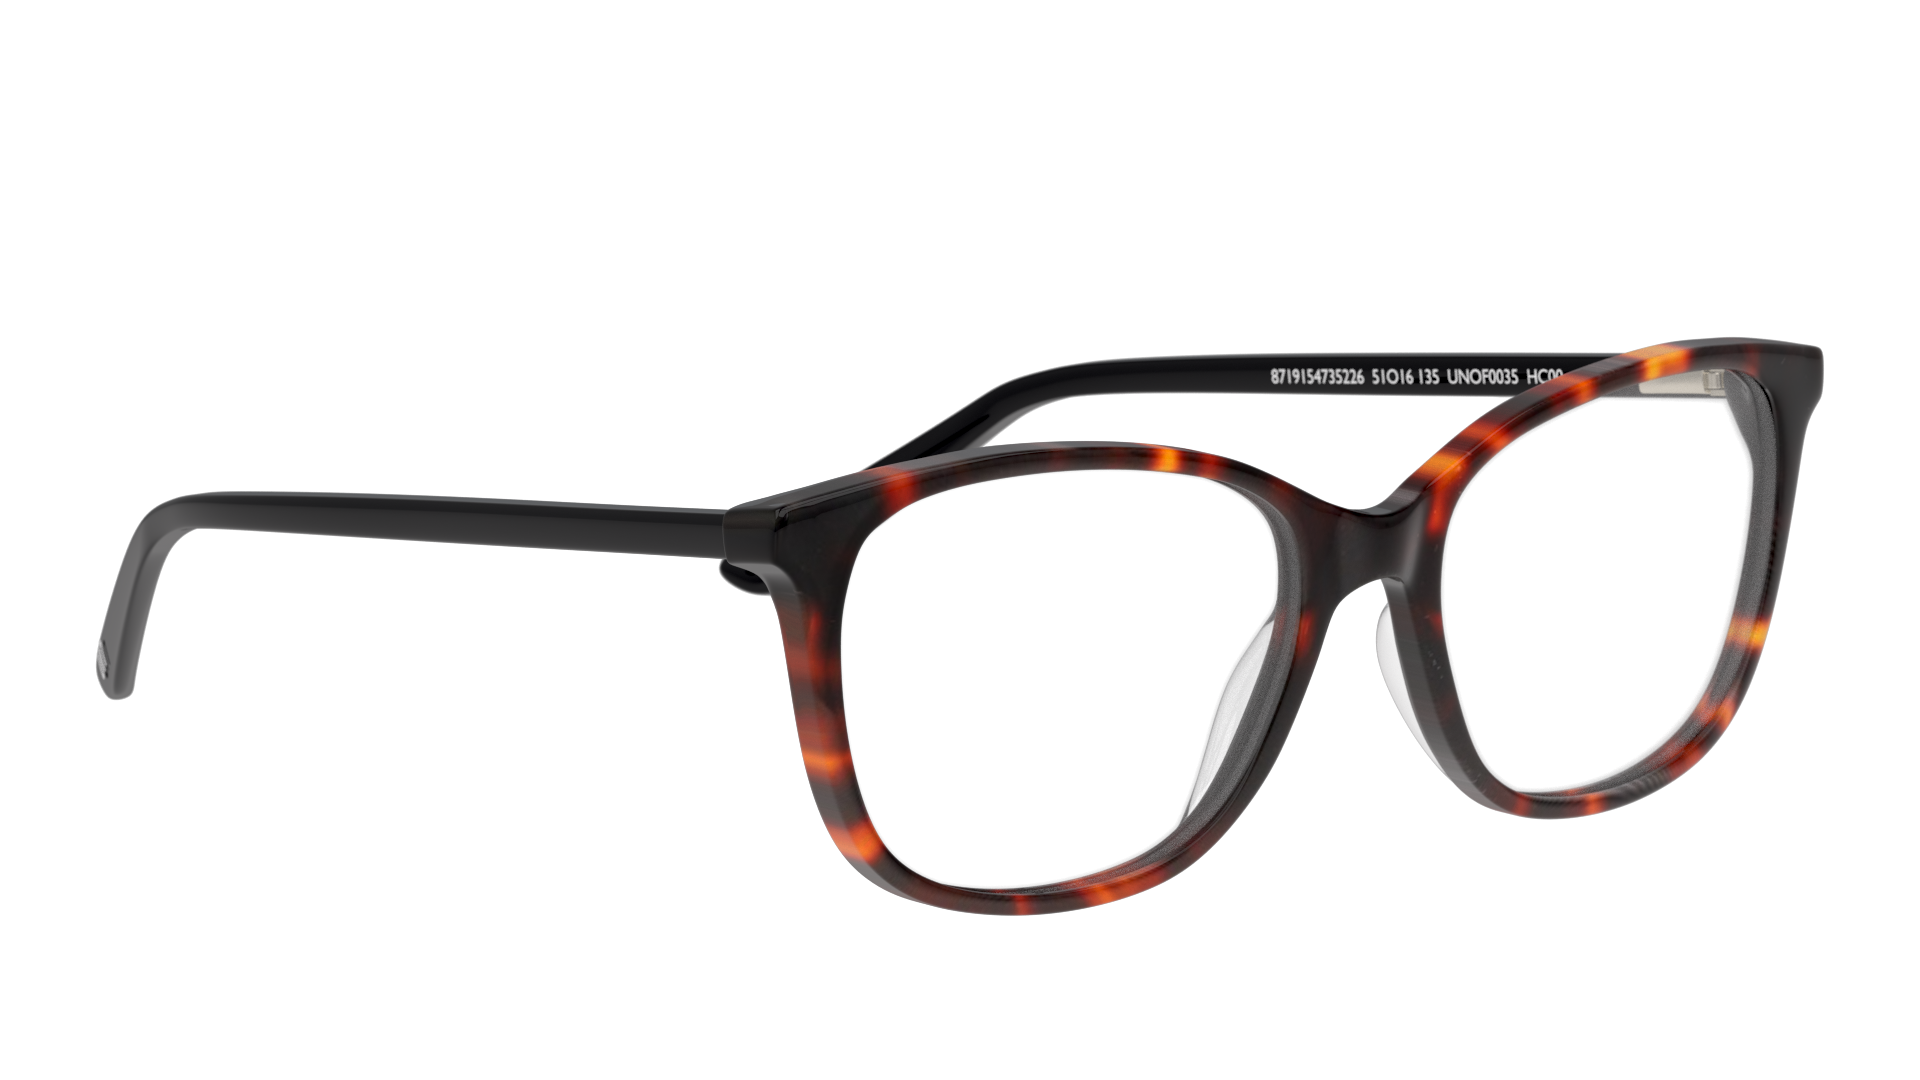 Angle_Right01 Unofficial UNOF0035 (HB00) Glasses Transparent / Tortoise Shell